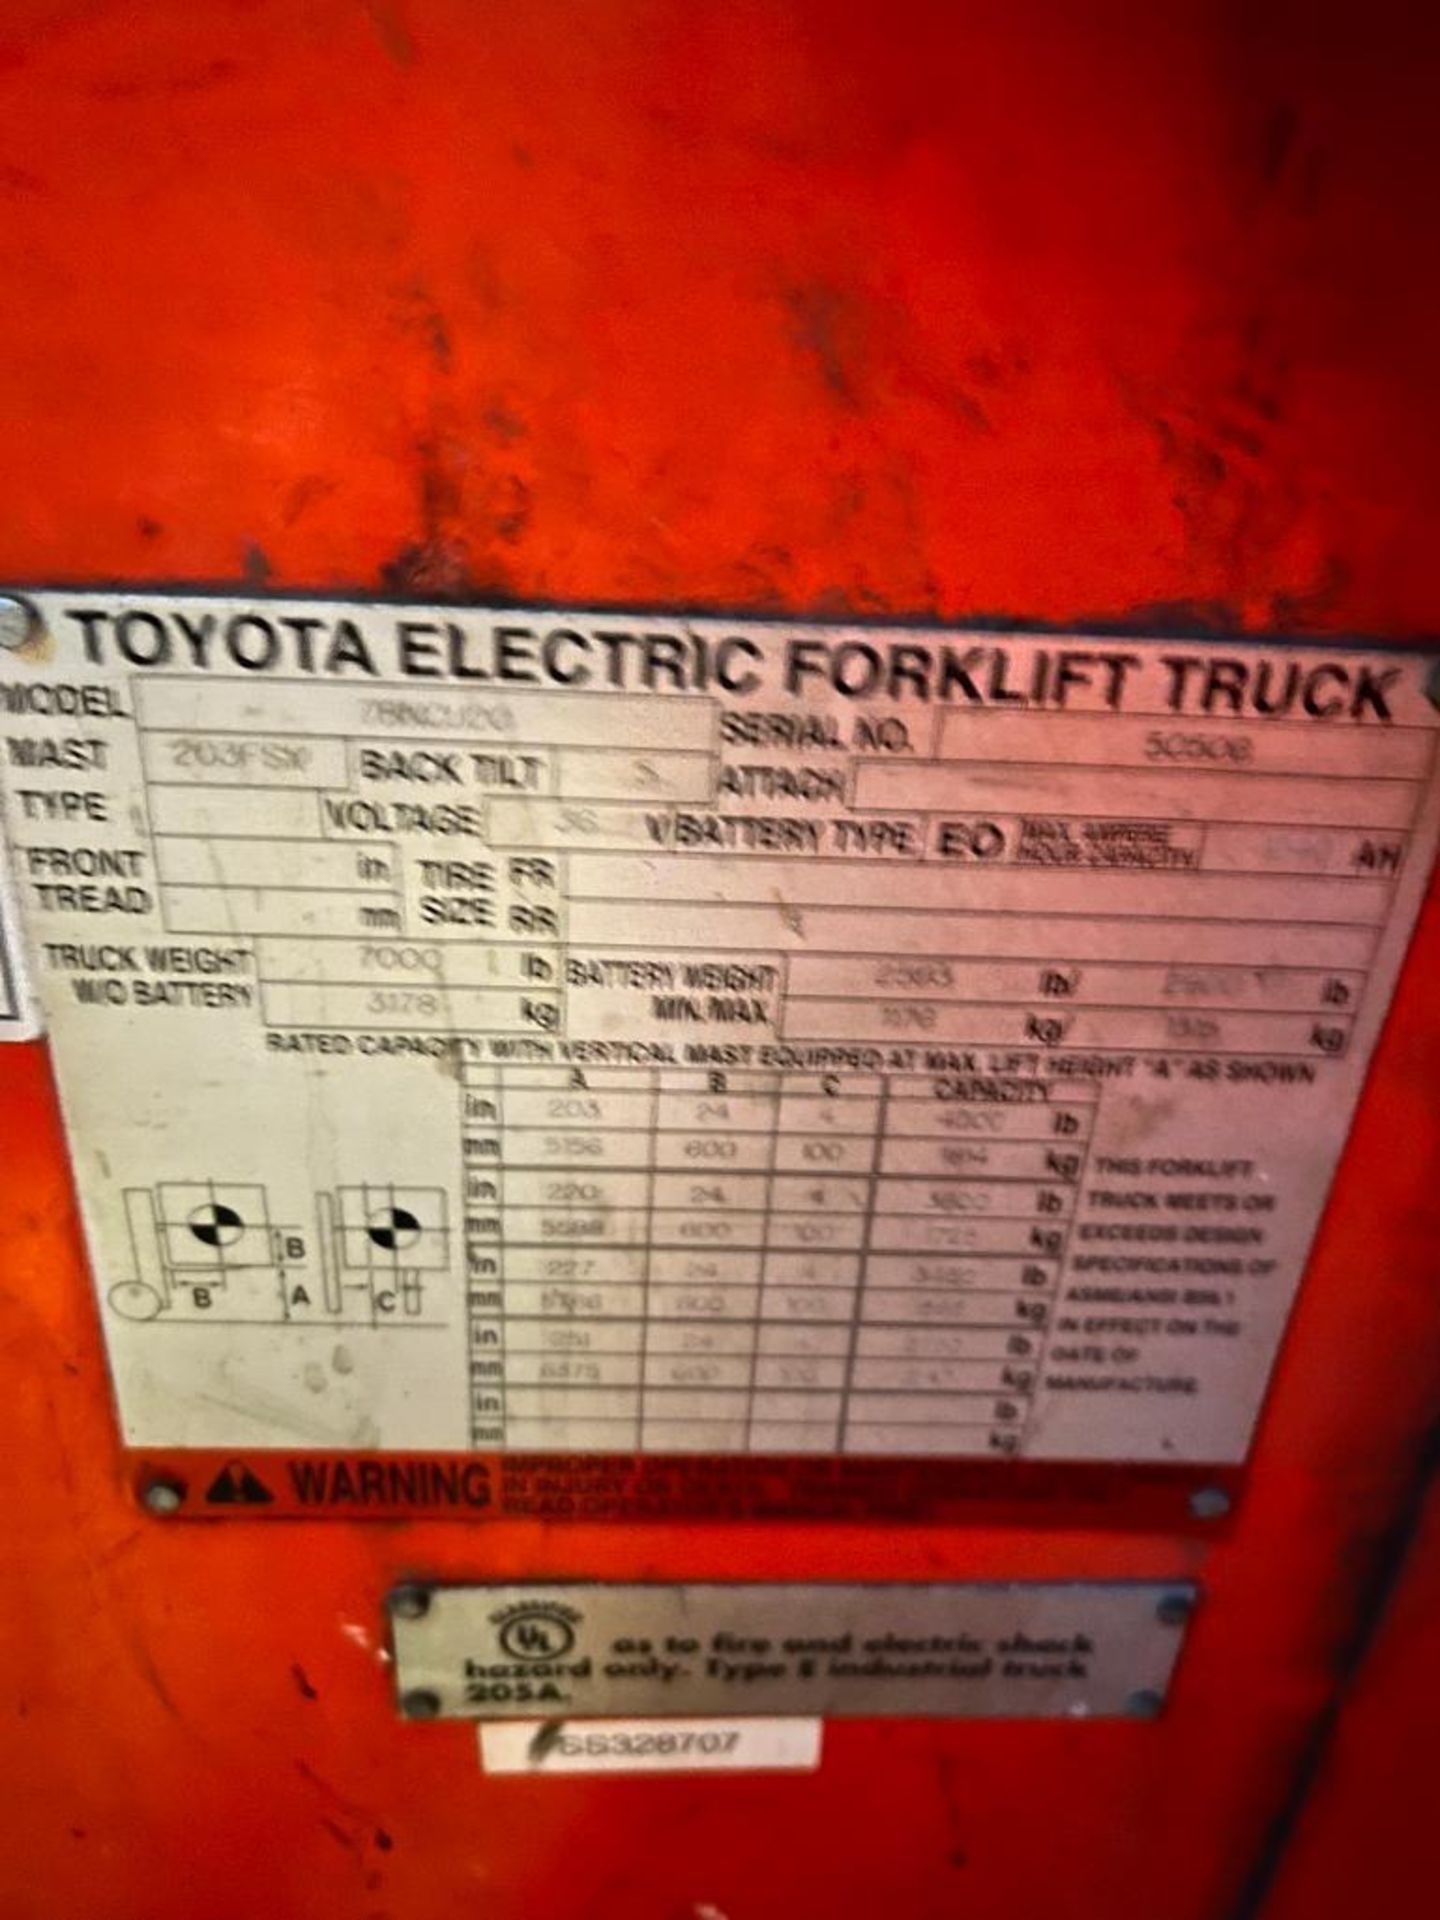 2010 Toyota Electric Standup Forklift, Model 7BNCU20, S/N 50506, 4,000 LB. Cap., 7,986 Hours, 250" T - Image 4 of 4